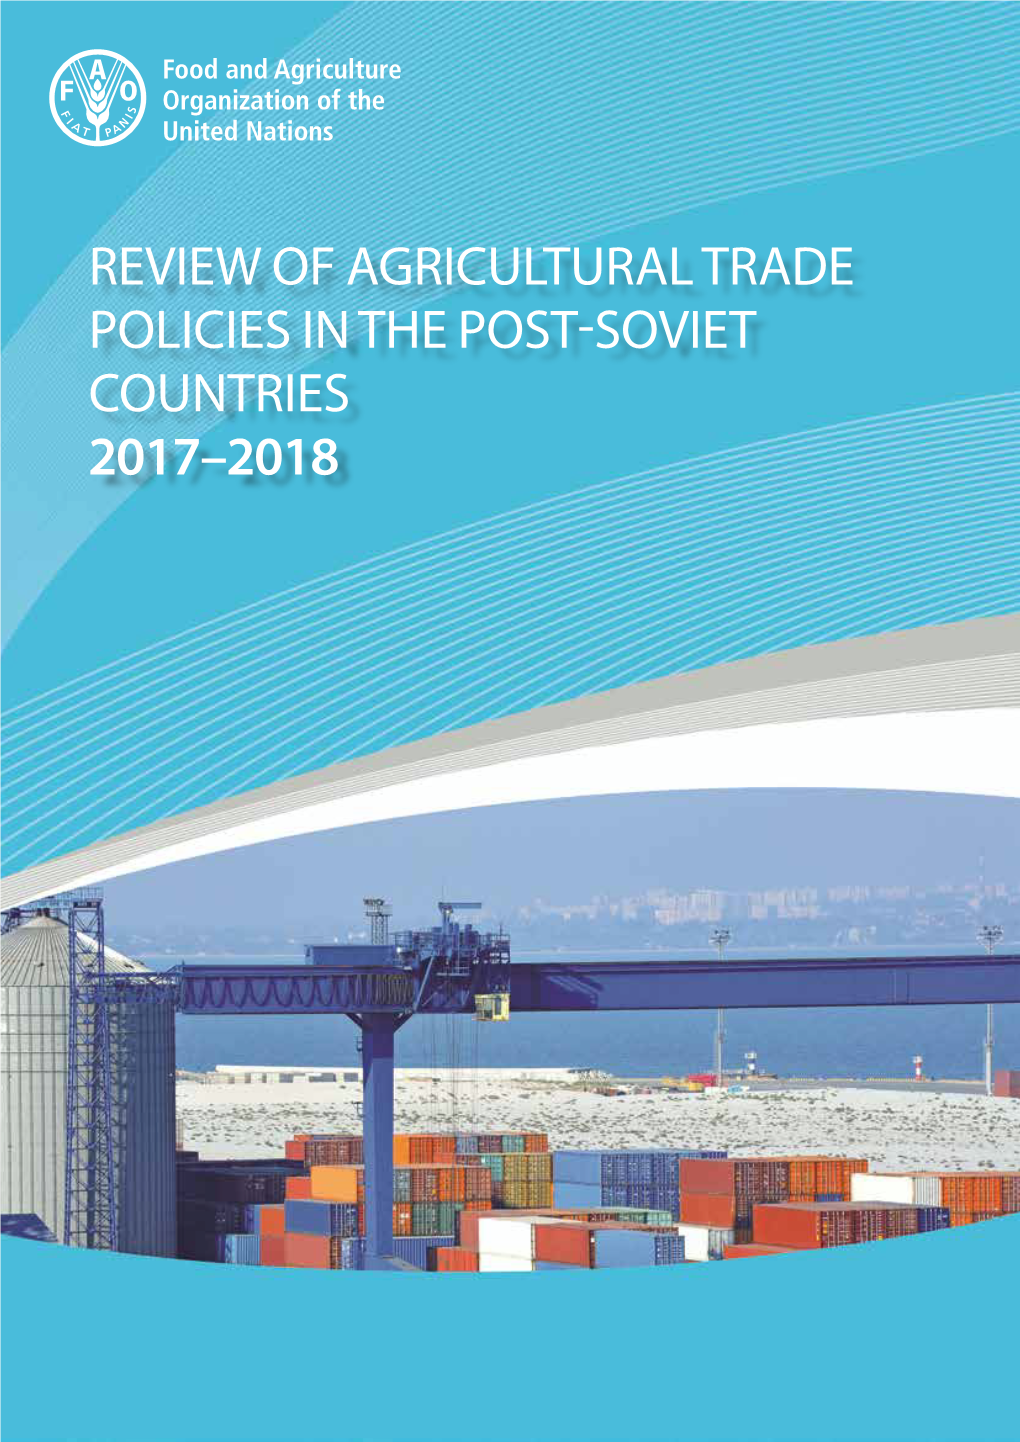 Review of Agricultural Trade Policies in Post-Soviet Countries 2017–2018